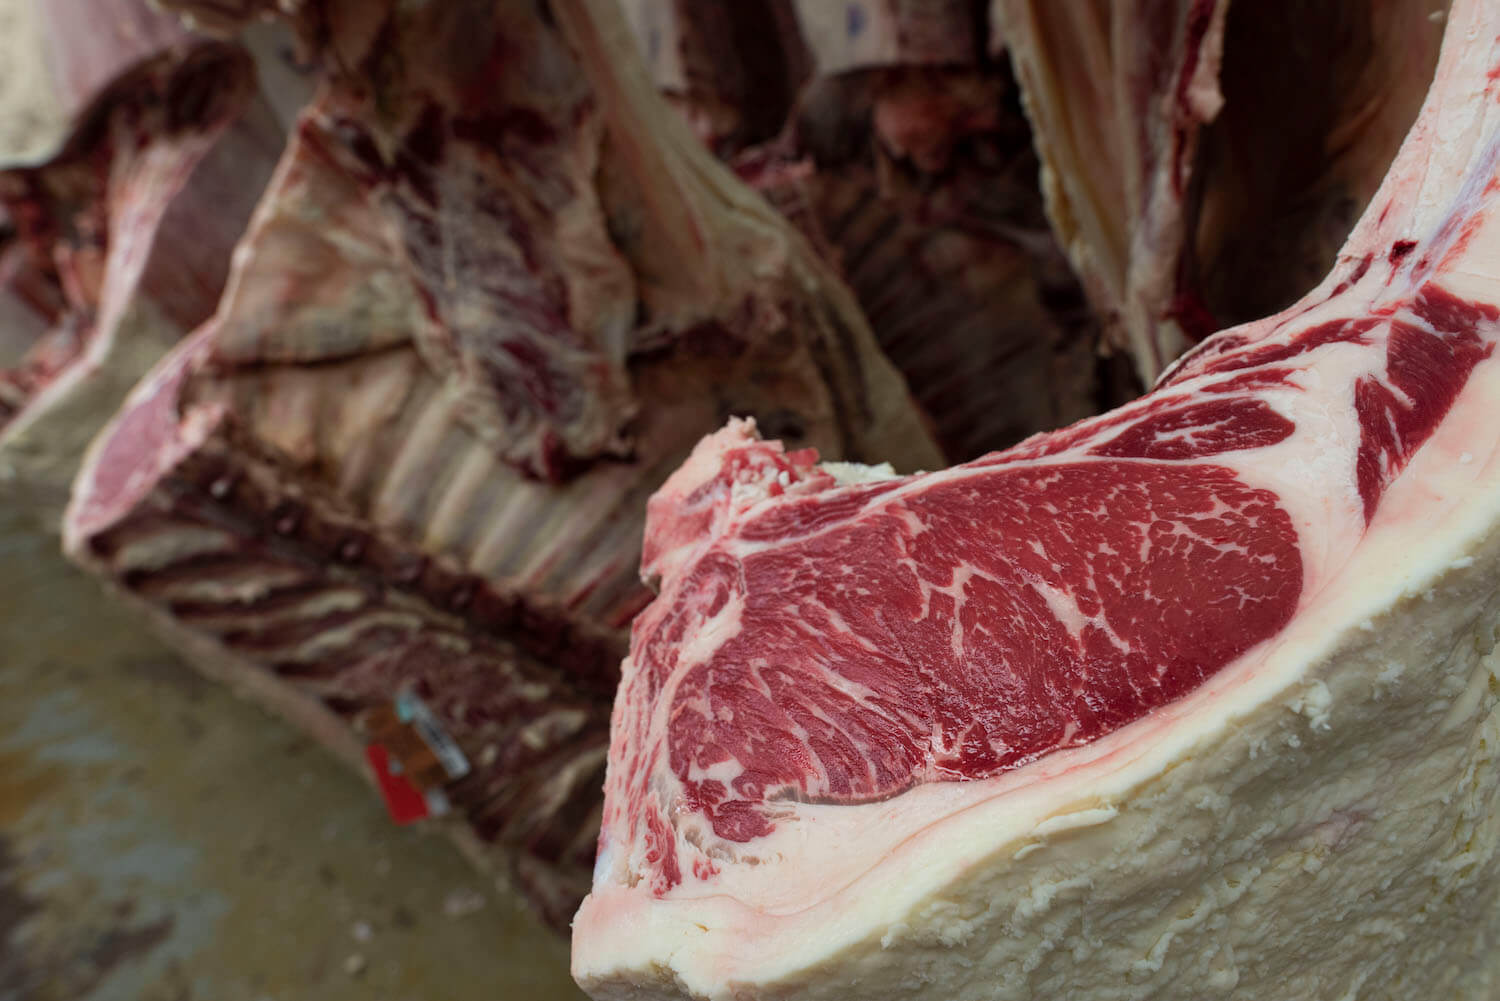 Beef producers are grinding up their nicest steaks, while retailers can't  meet demand for cheaper cuts